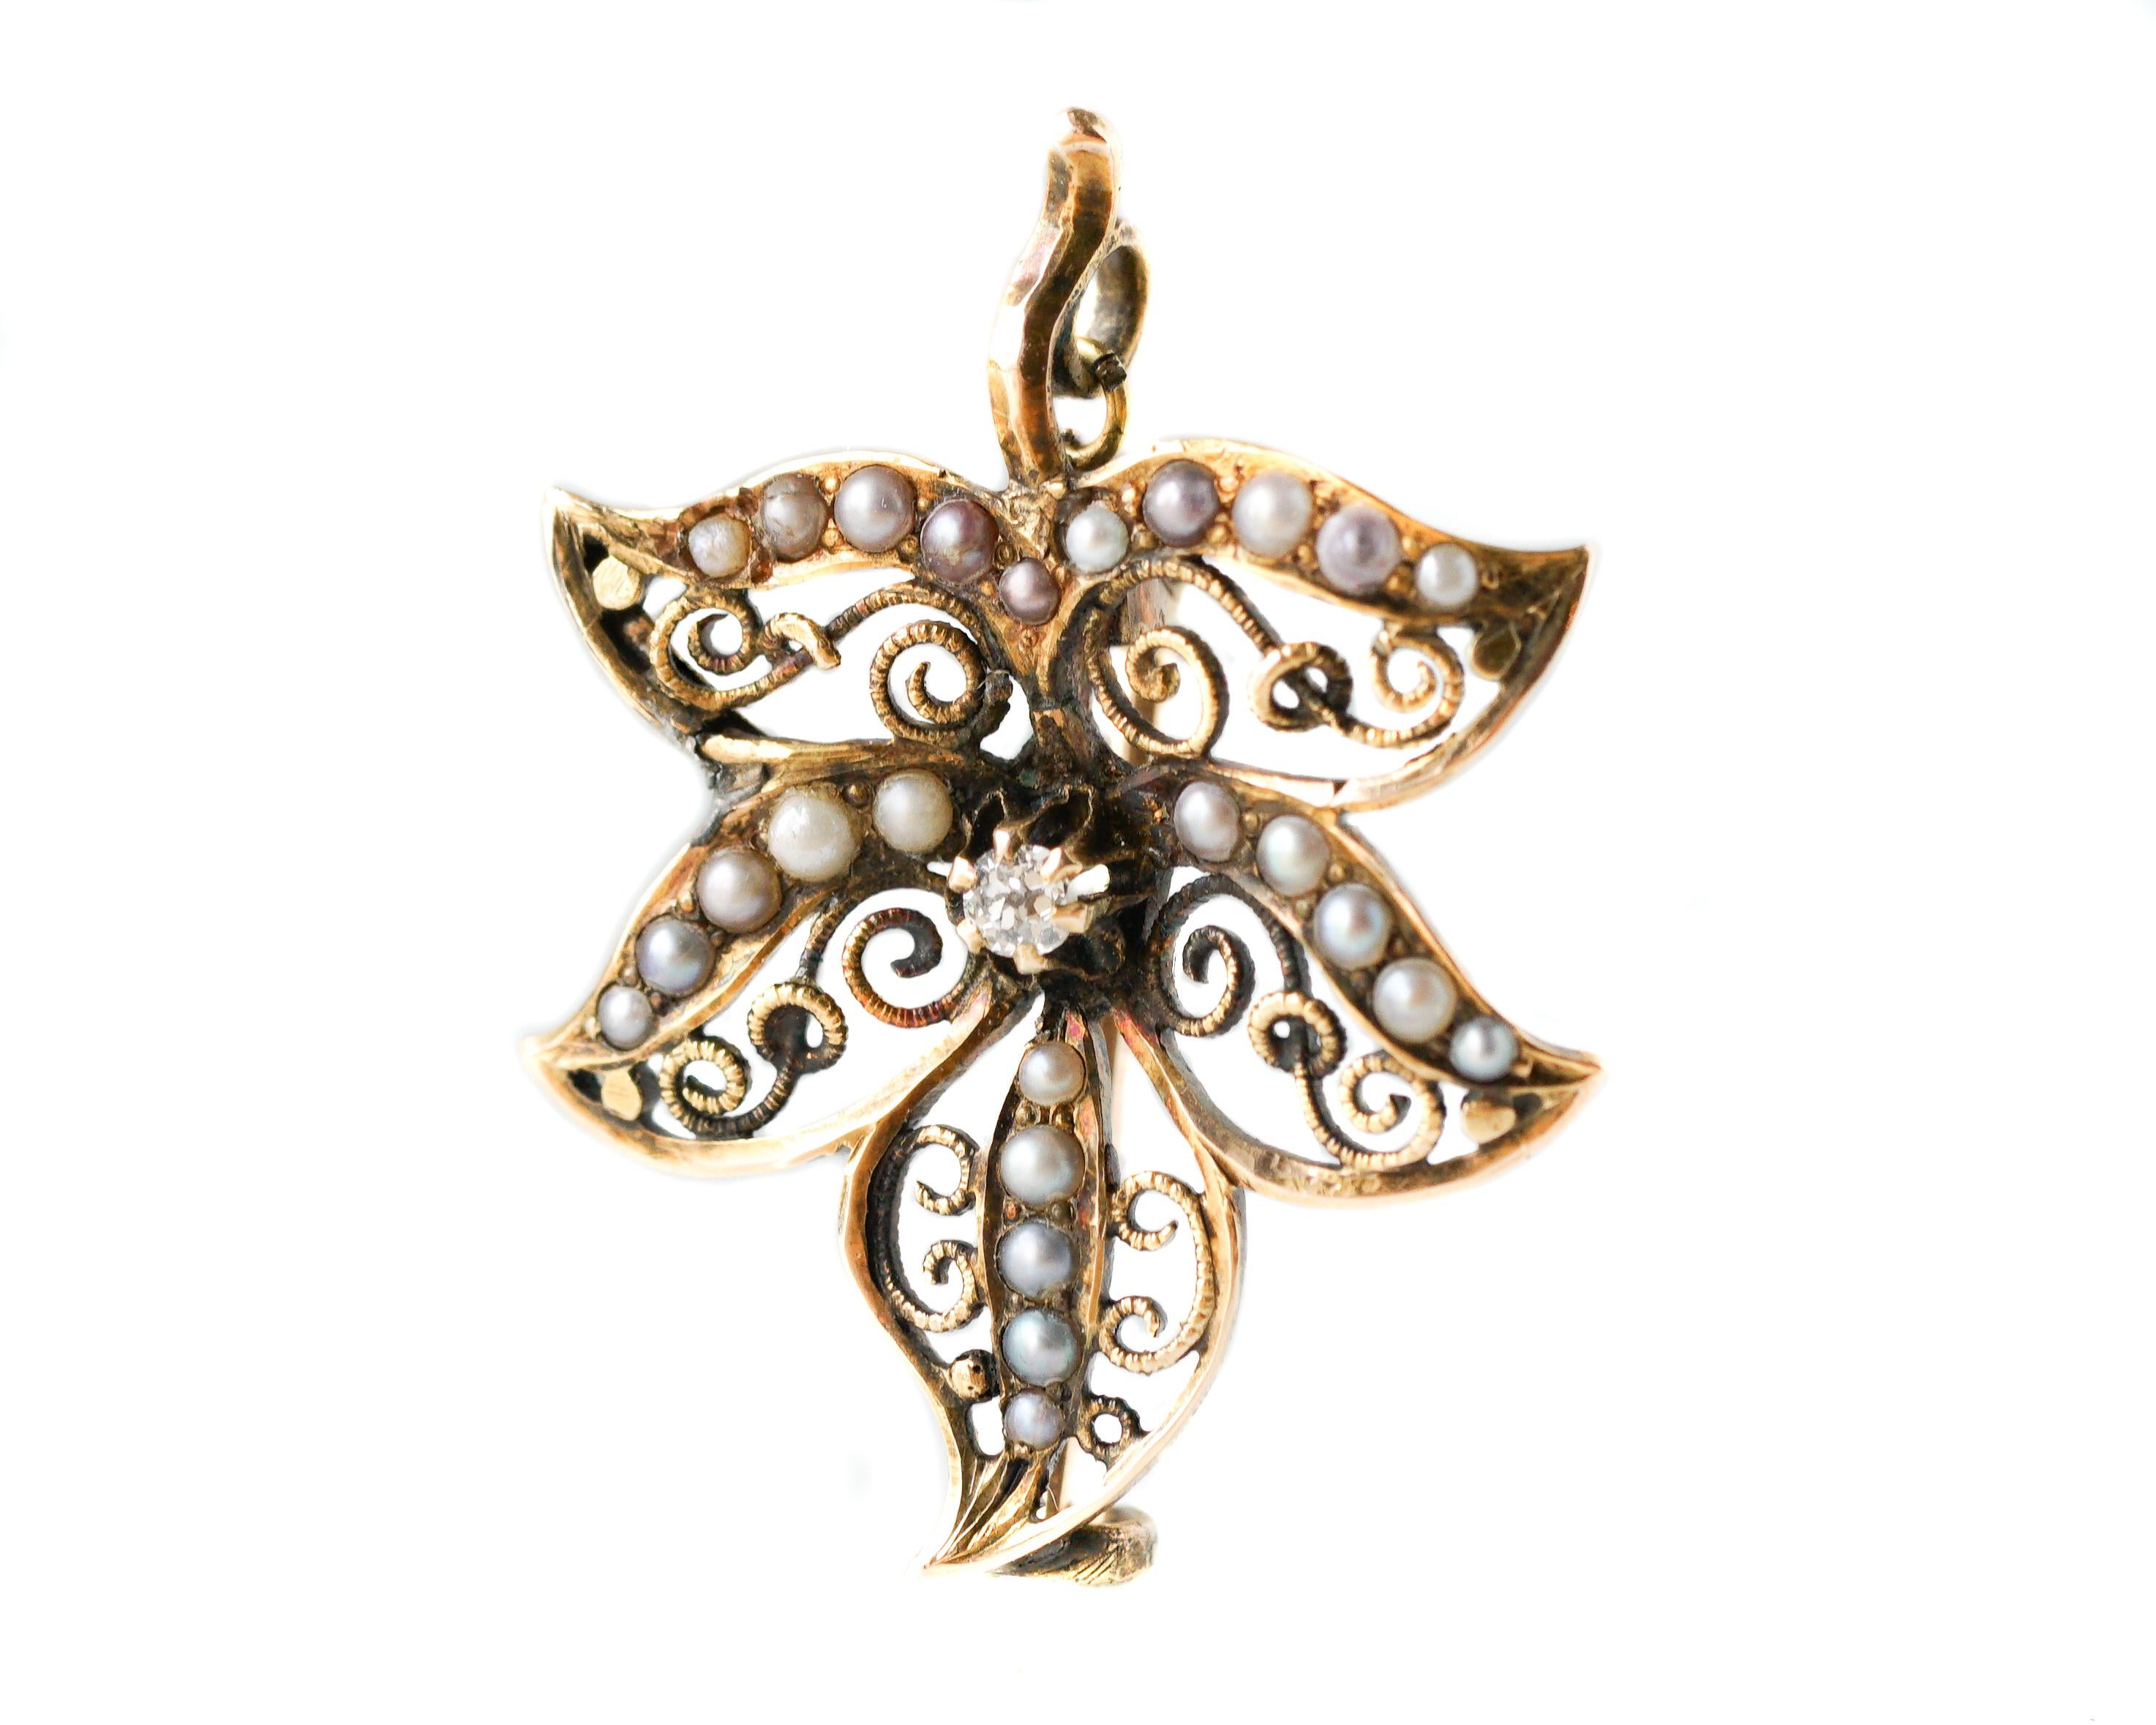 Floral Leaf Convertible Pin - 14 karat Yellow Gold, Diamond, Seed Pearls

Features:
0.05 carat Old Mine Diamond
25 Seed Pearls
14 karat Yellow Gold
6-Prong Diamond Setting
Gold Swirl Filigree Detail
Antique C-Clasp Pin
Fixed Bail on back of Stem